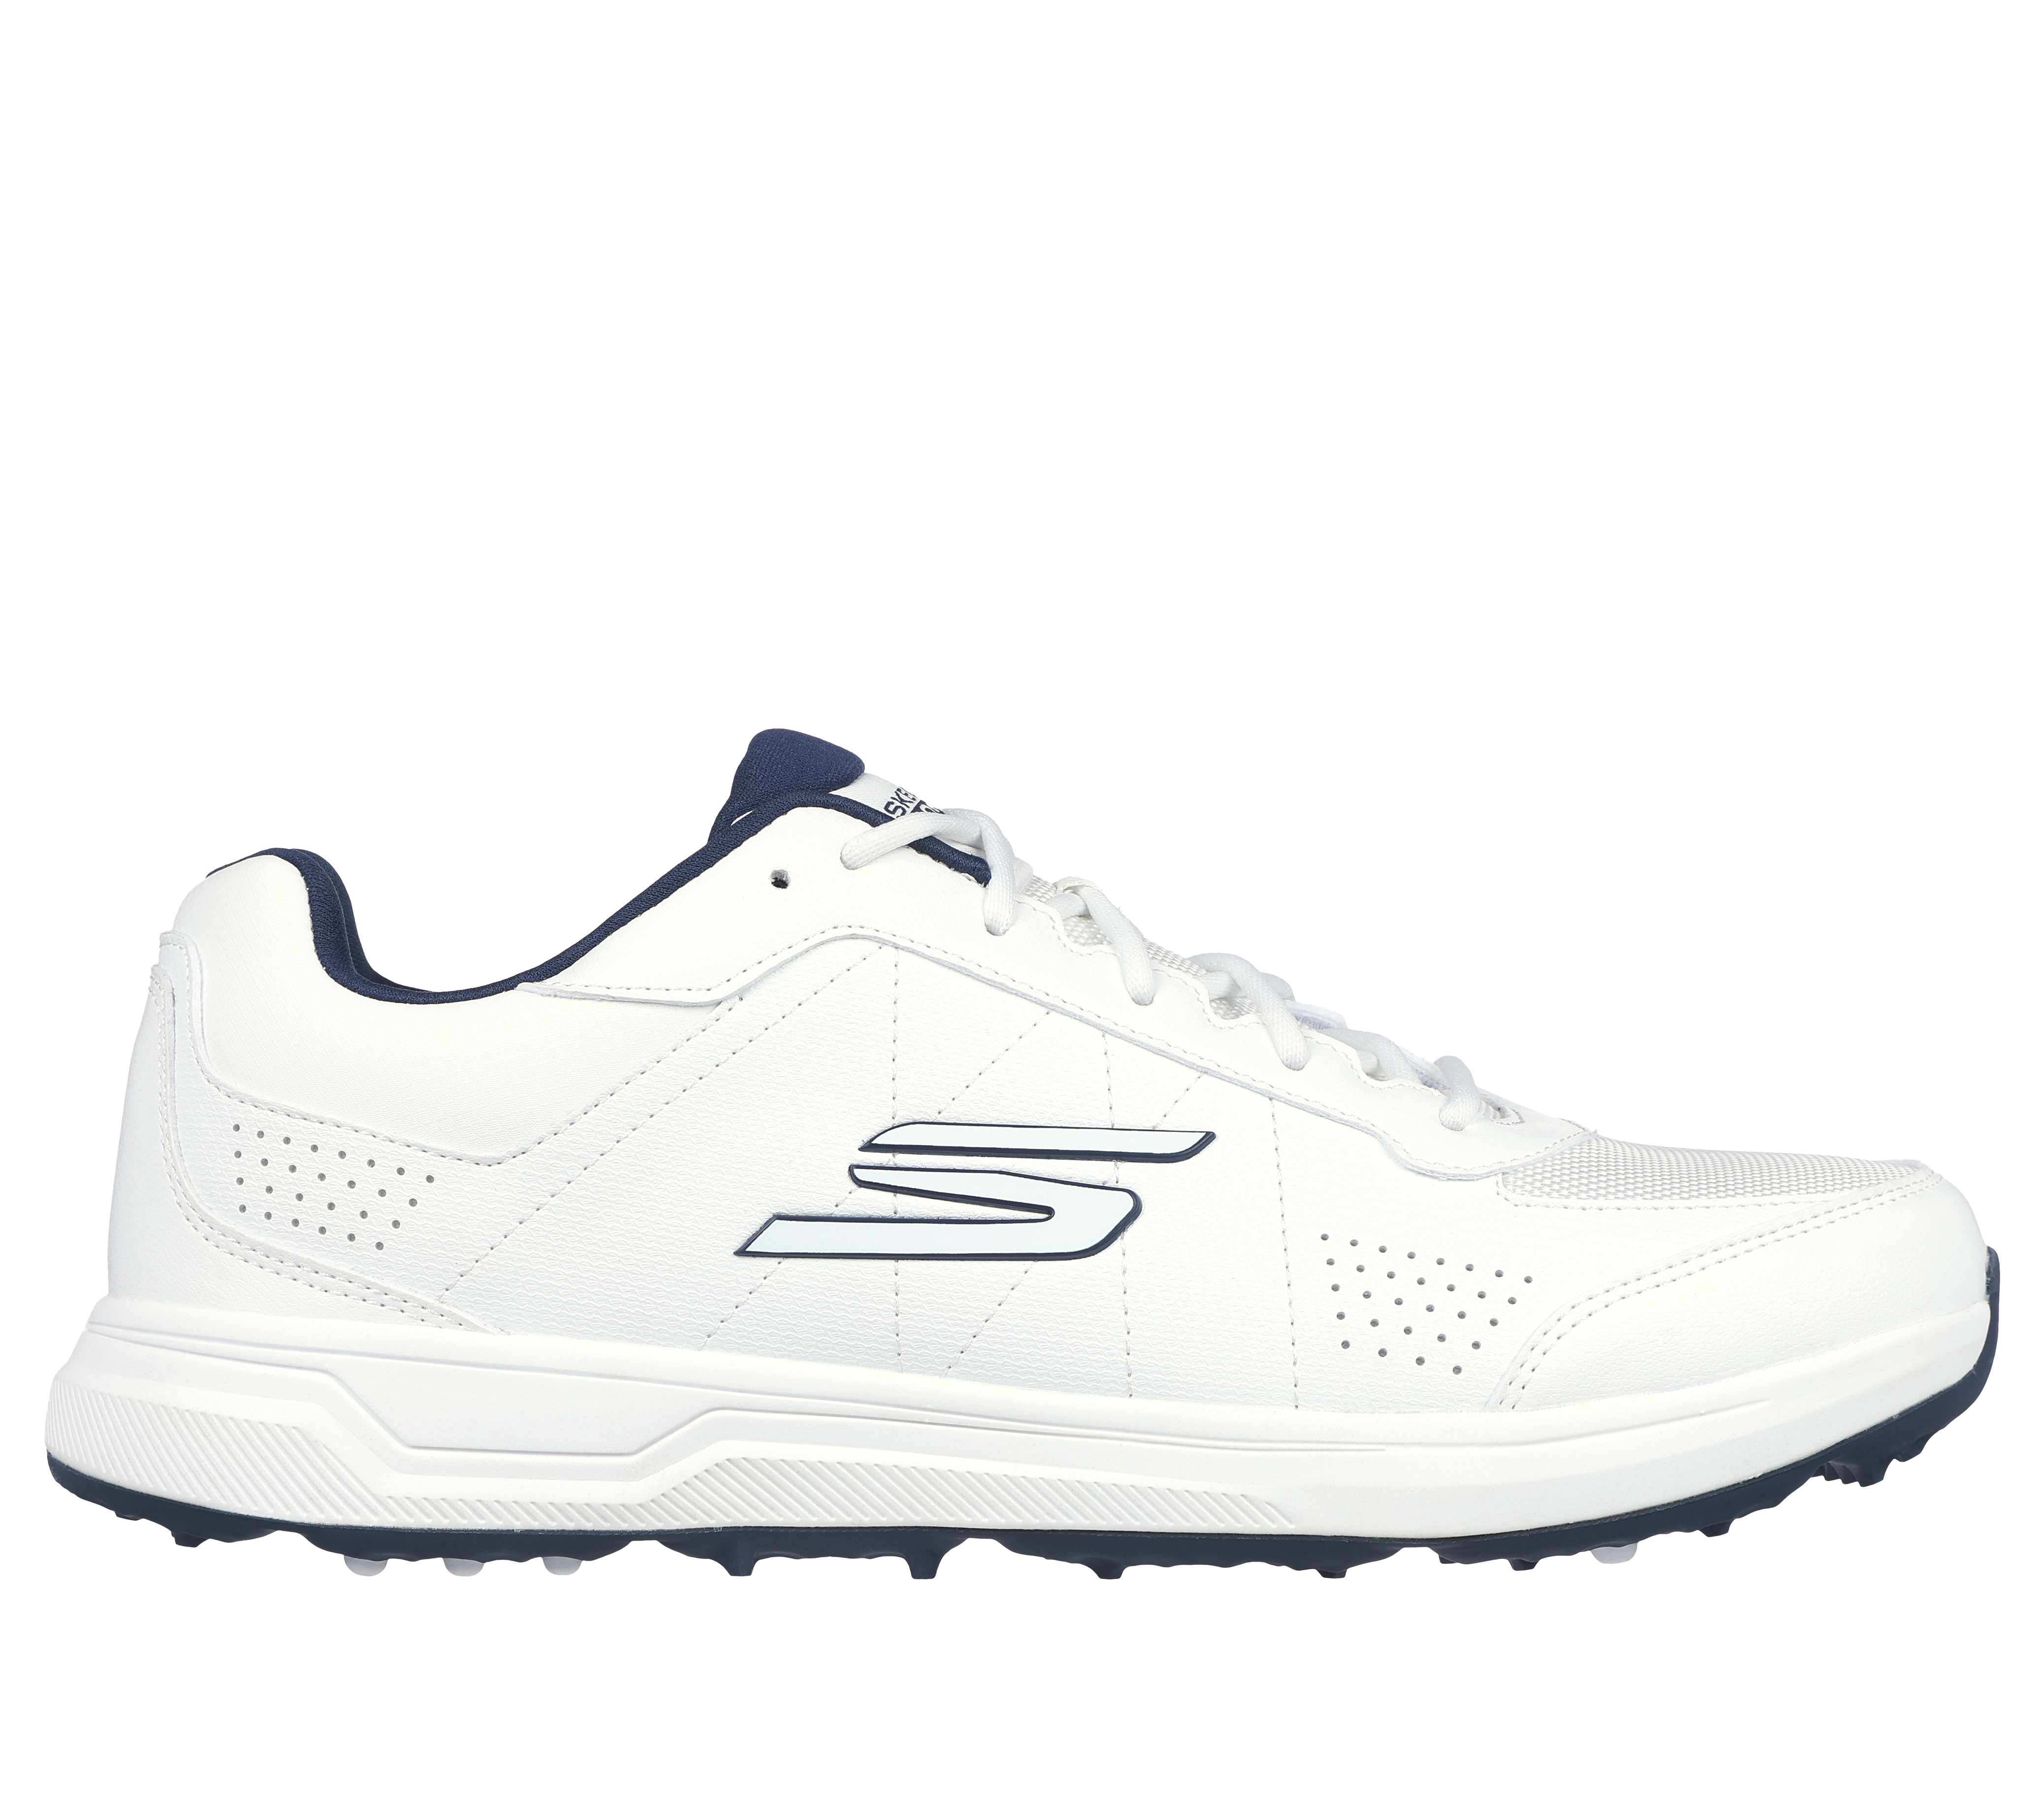 Relaxed Fit: GO | SKECHERS